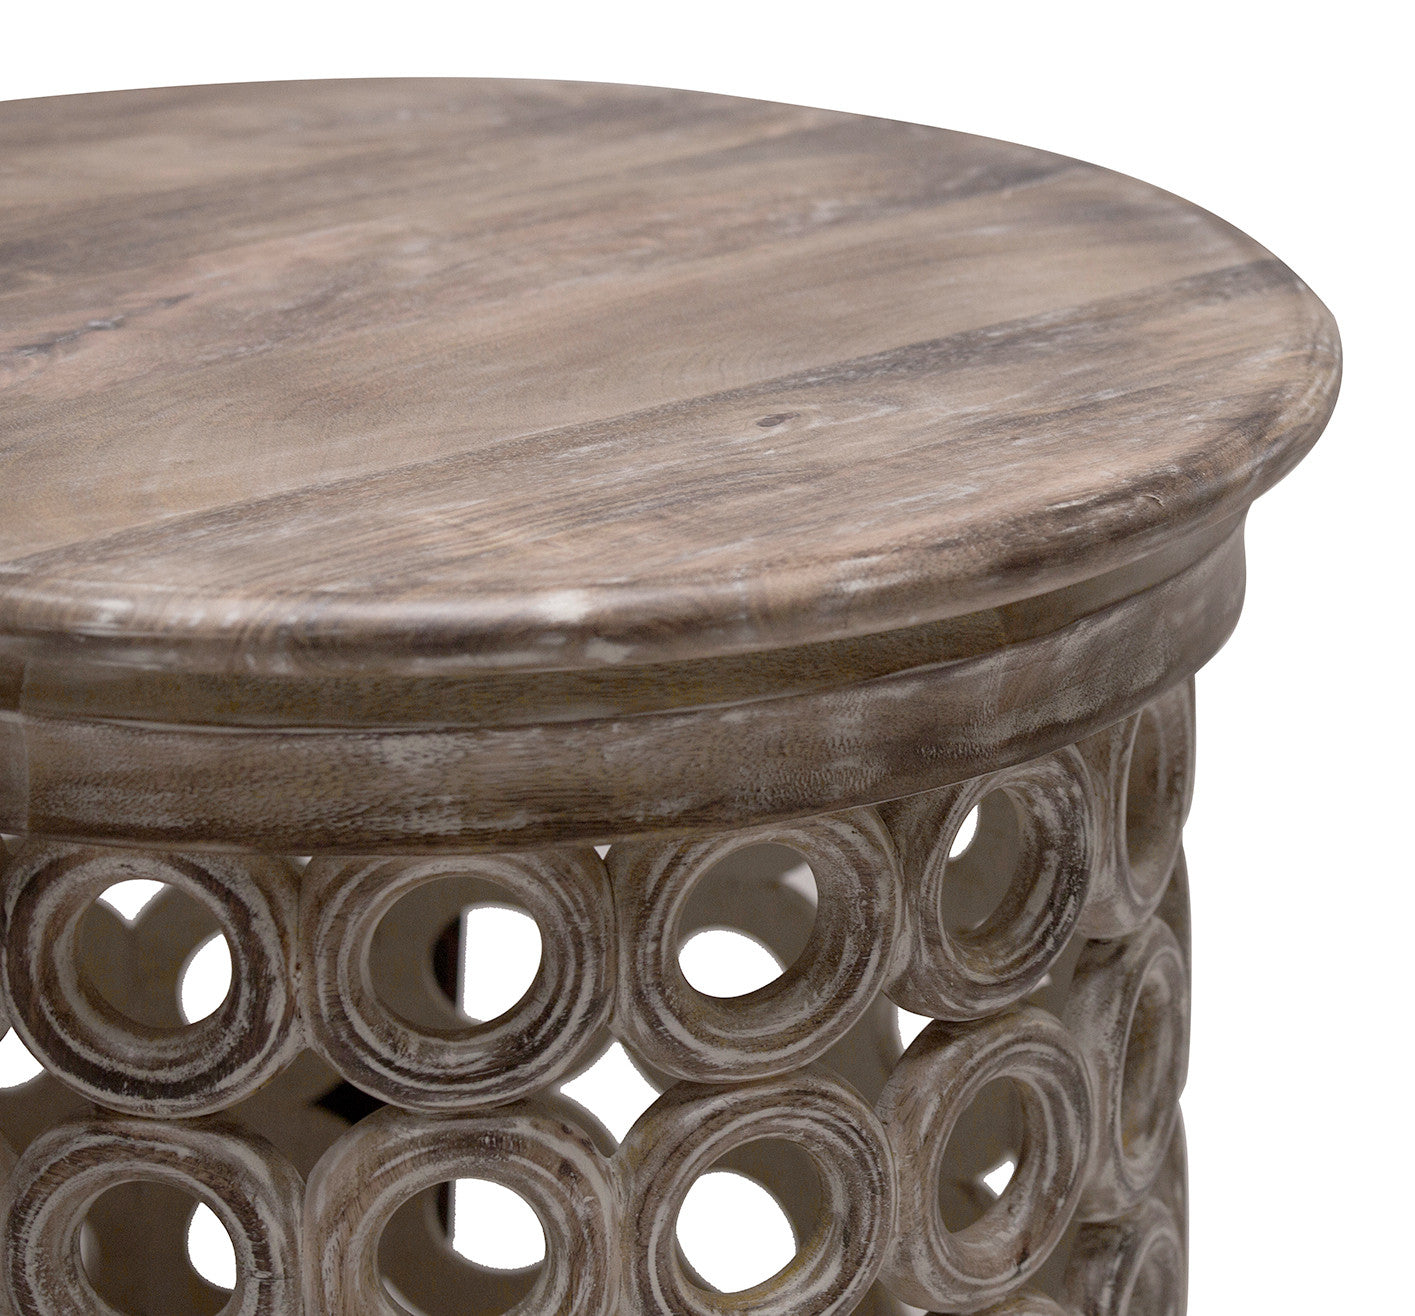 24" Brown Solid Wood Round End Table